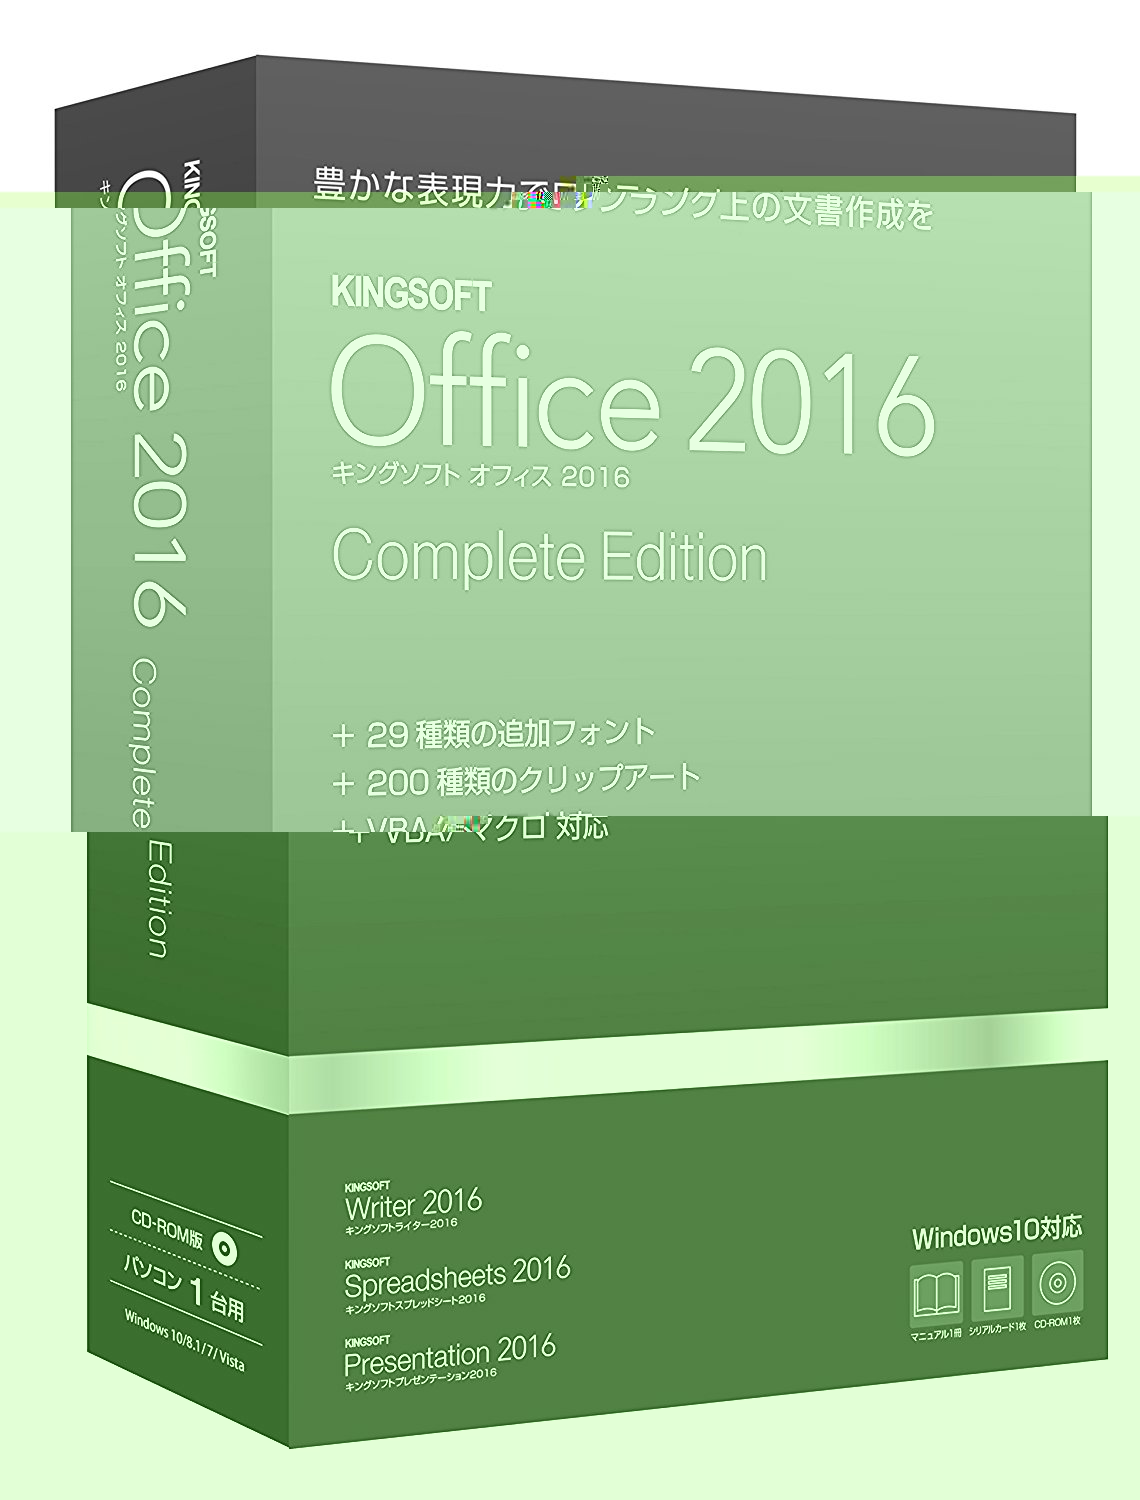 KINGSOFT Office 2016 Complete Edition